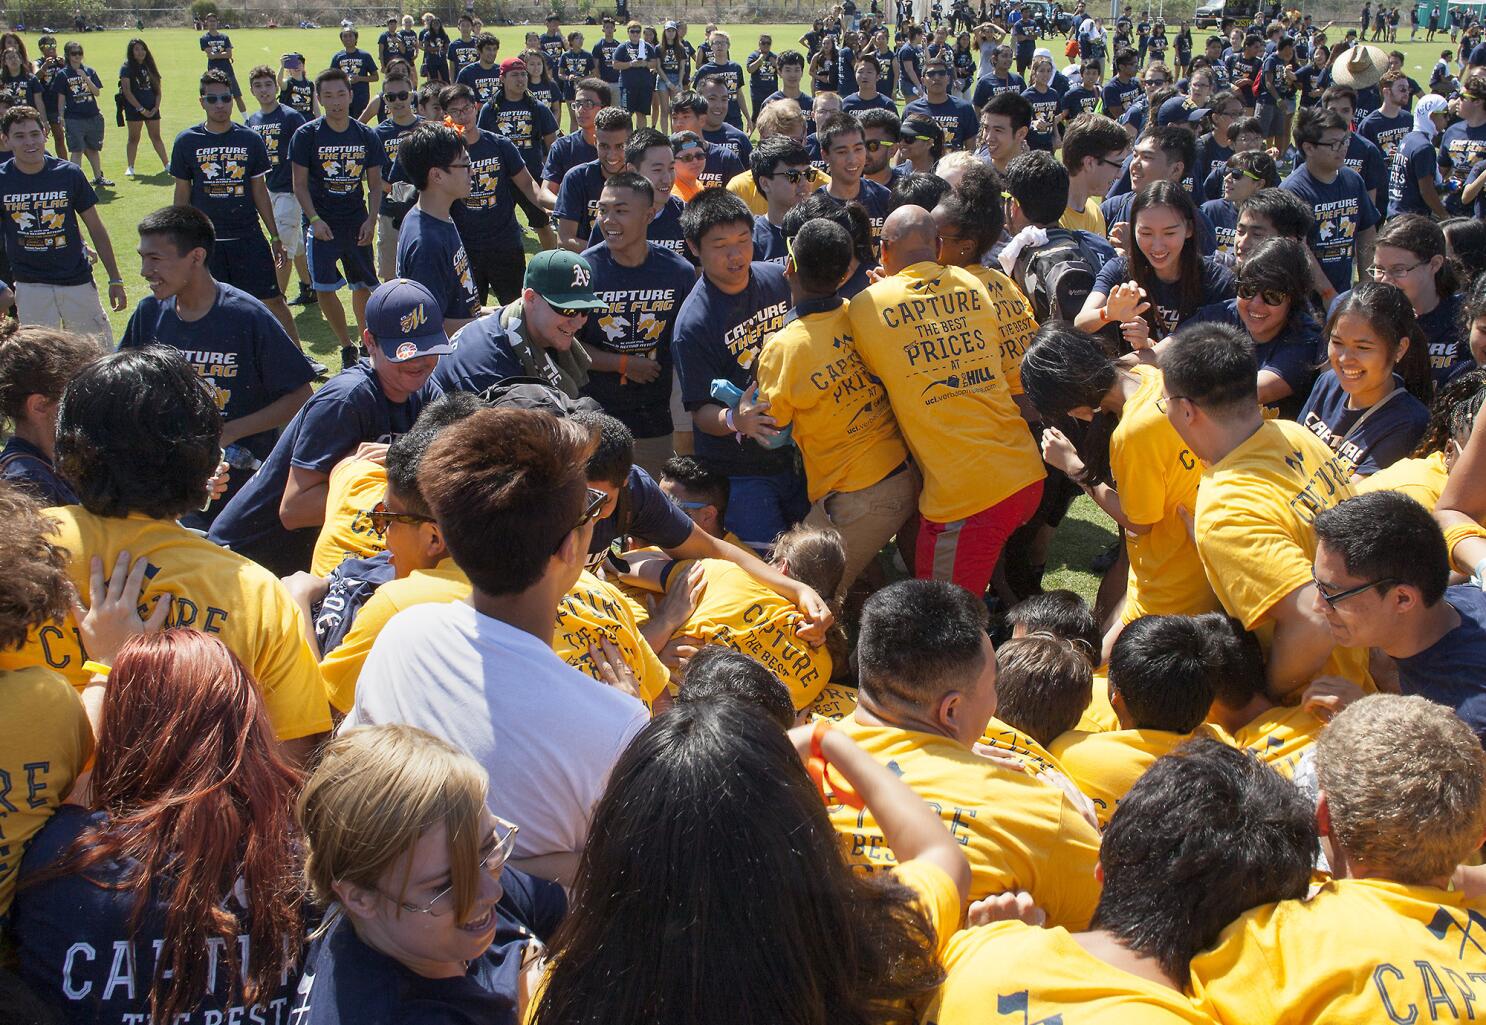 Capture the Flag World Record at UC Irvine - Los Angeles Times